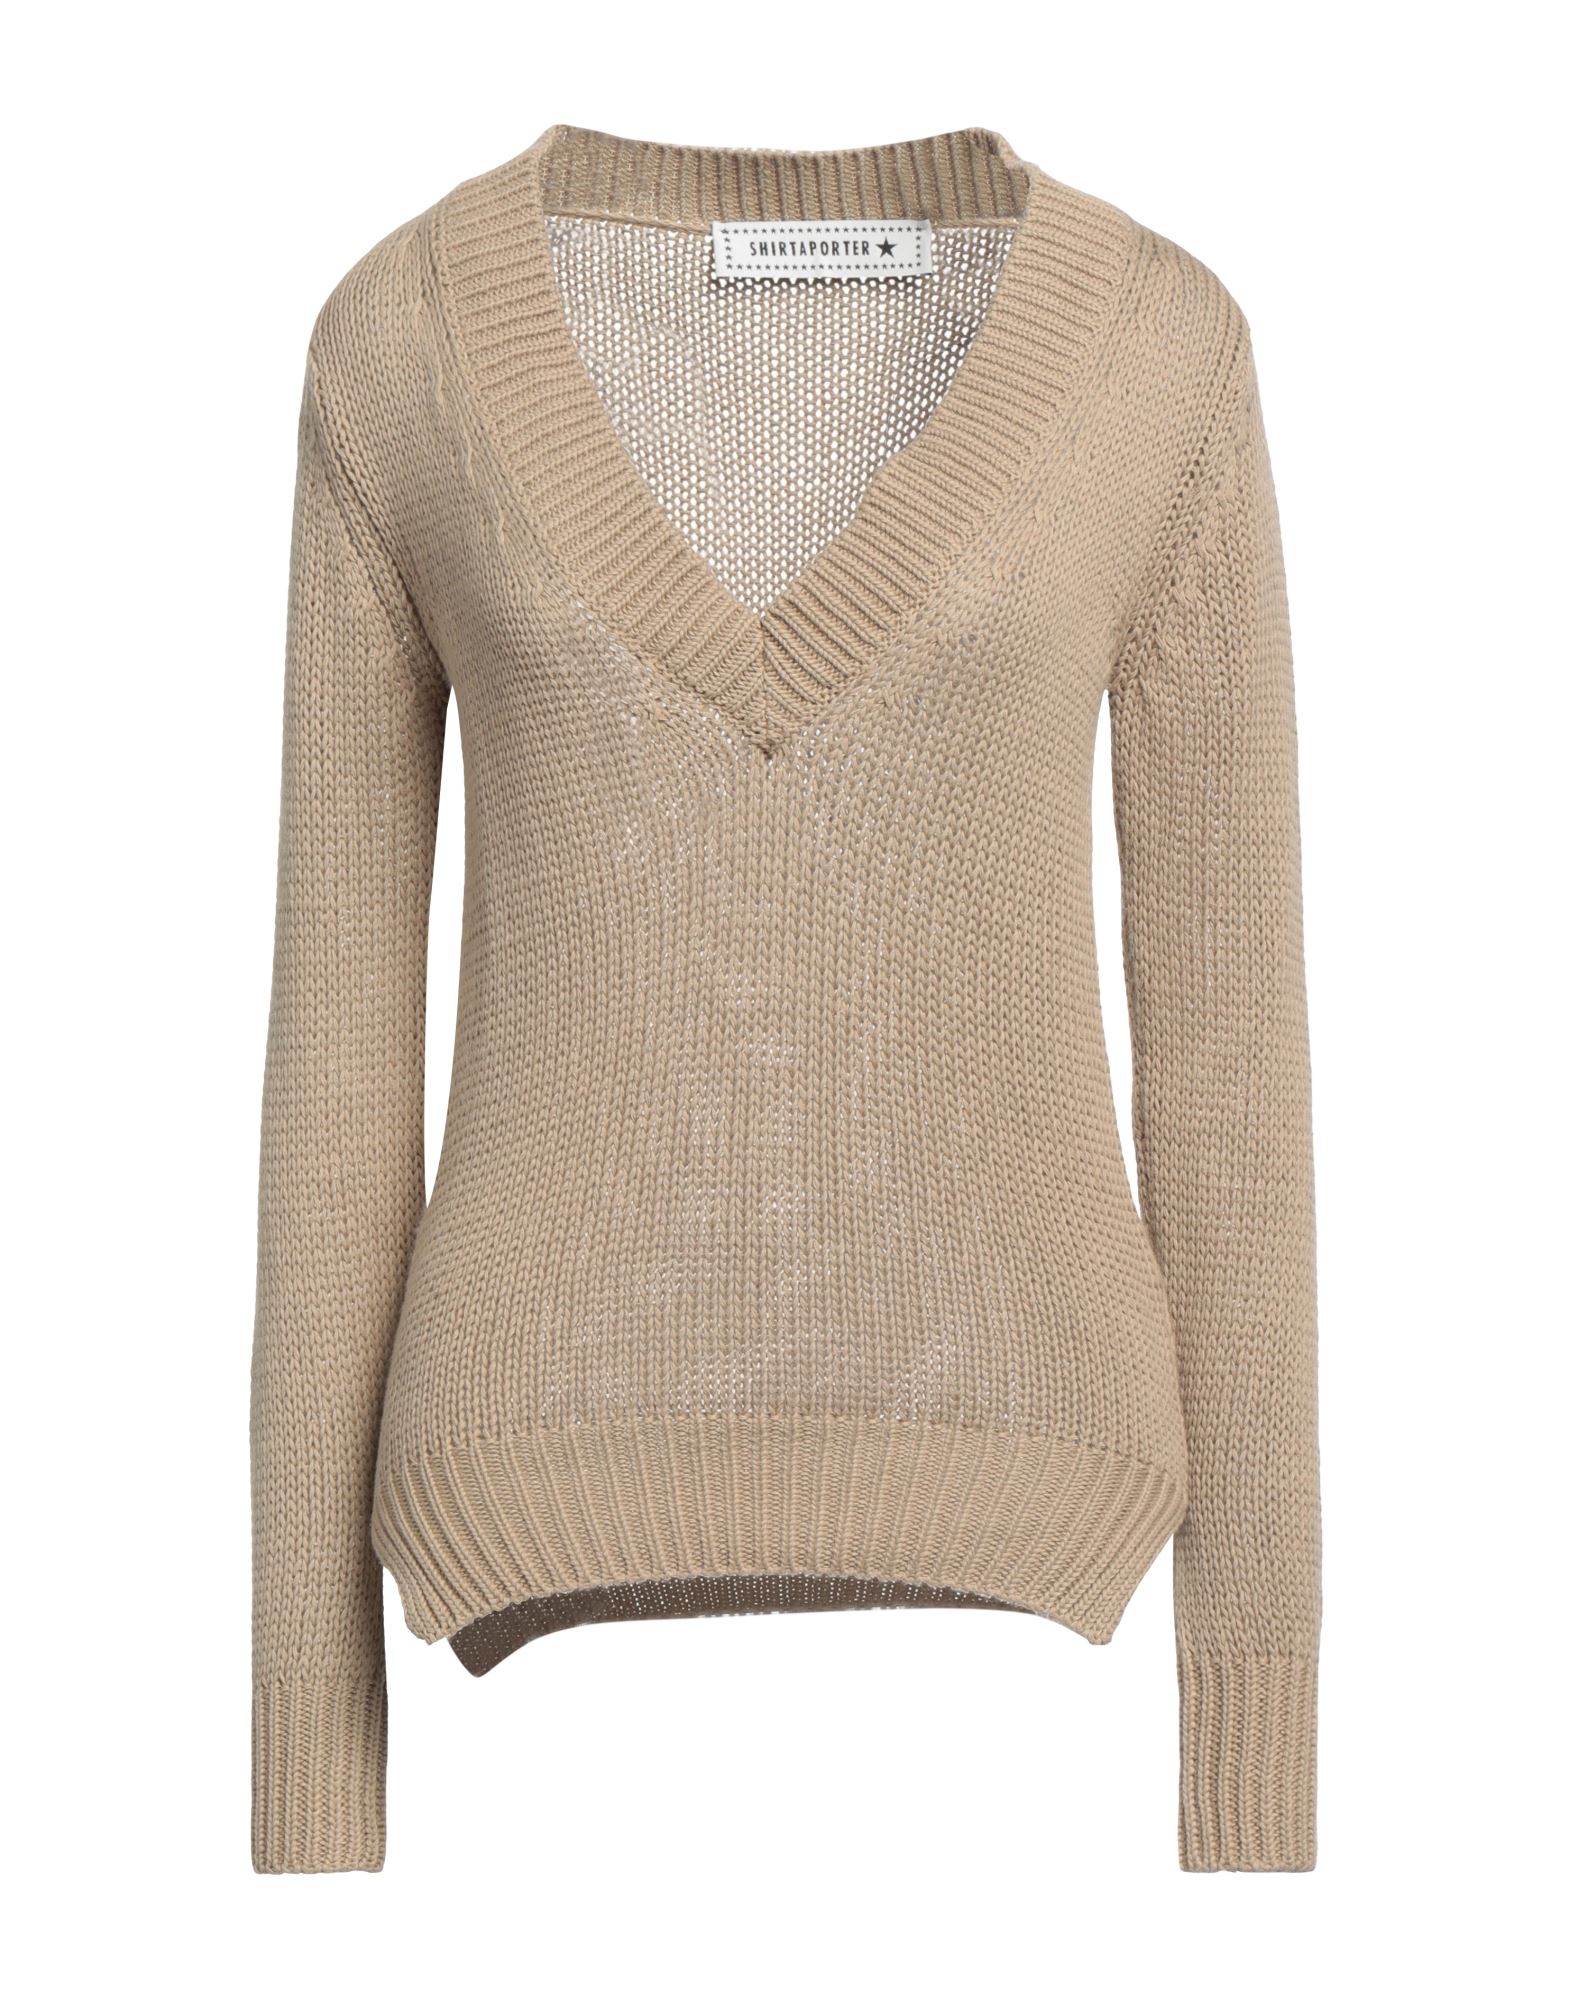 Shirtaporter Sweaters In Beige